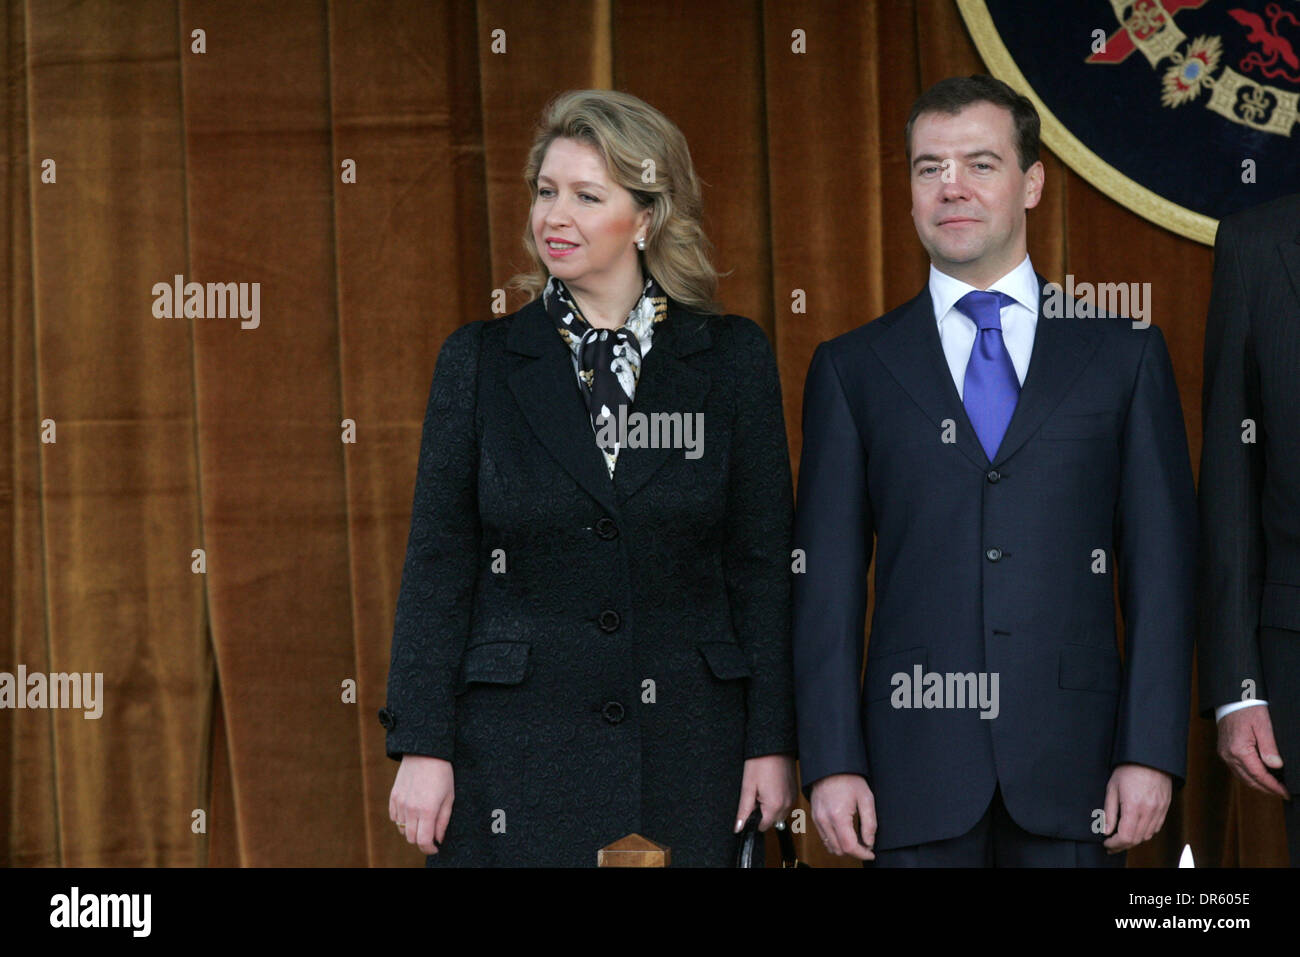 Mar 02, 2009 - Madrid, Spain - SVETLANA MEDVEDEVA and Russian President DMITRY MEDVEDEV at the Zarzuela palace, the official residence of the King and Queen of Spain. (Credit Image: © PhotoXpress/ZUMA Press) RESTRICTIONS: * North and South America Rights Only * Stock Photo